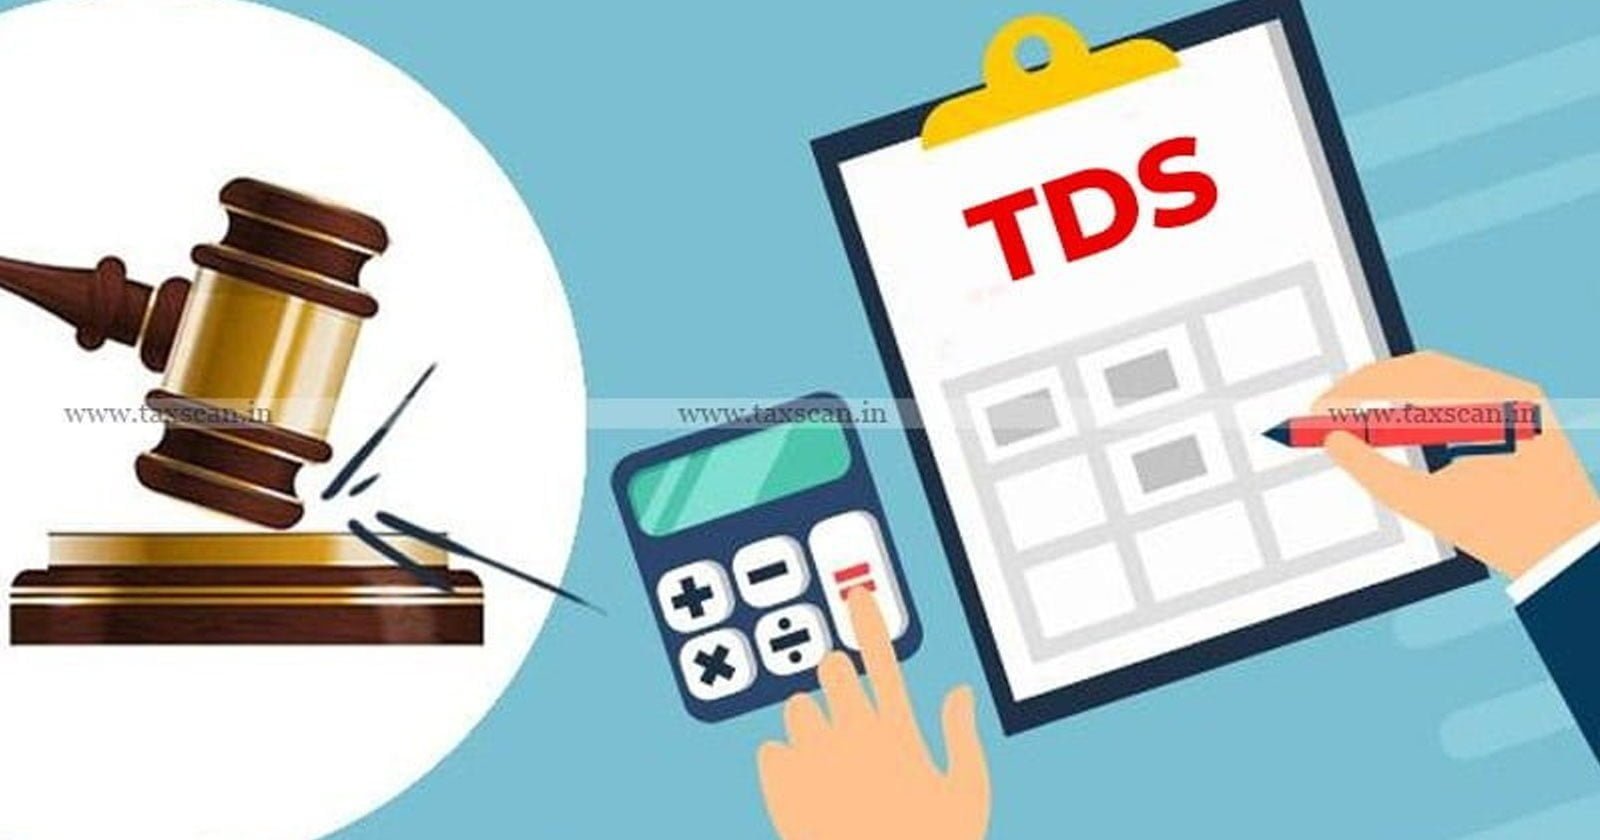 ITAT - TDS - Non Granting of TDS Benefits - Non Deposition of TDS - Income of Assessee - ITAT Upholds Non Granting of TDS - taxscan